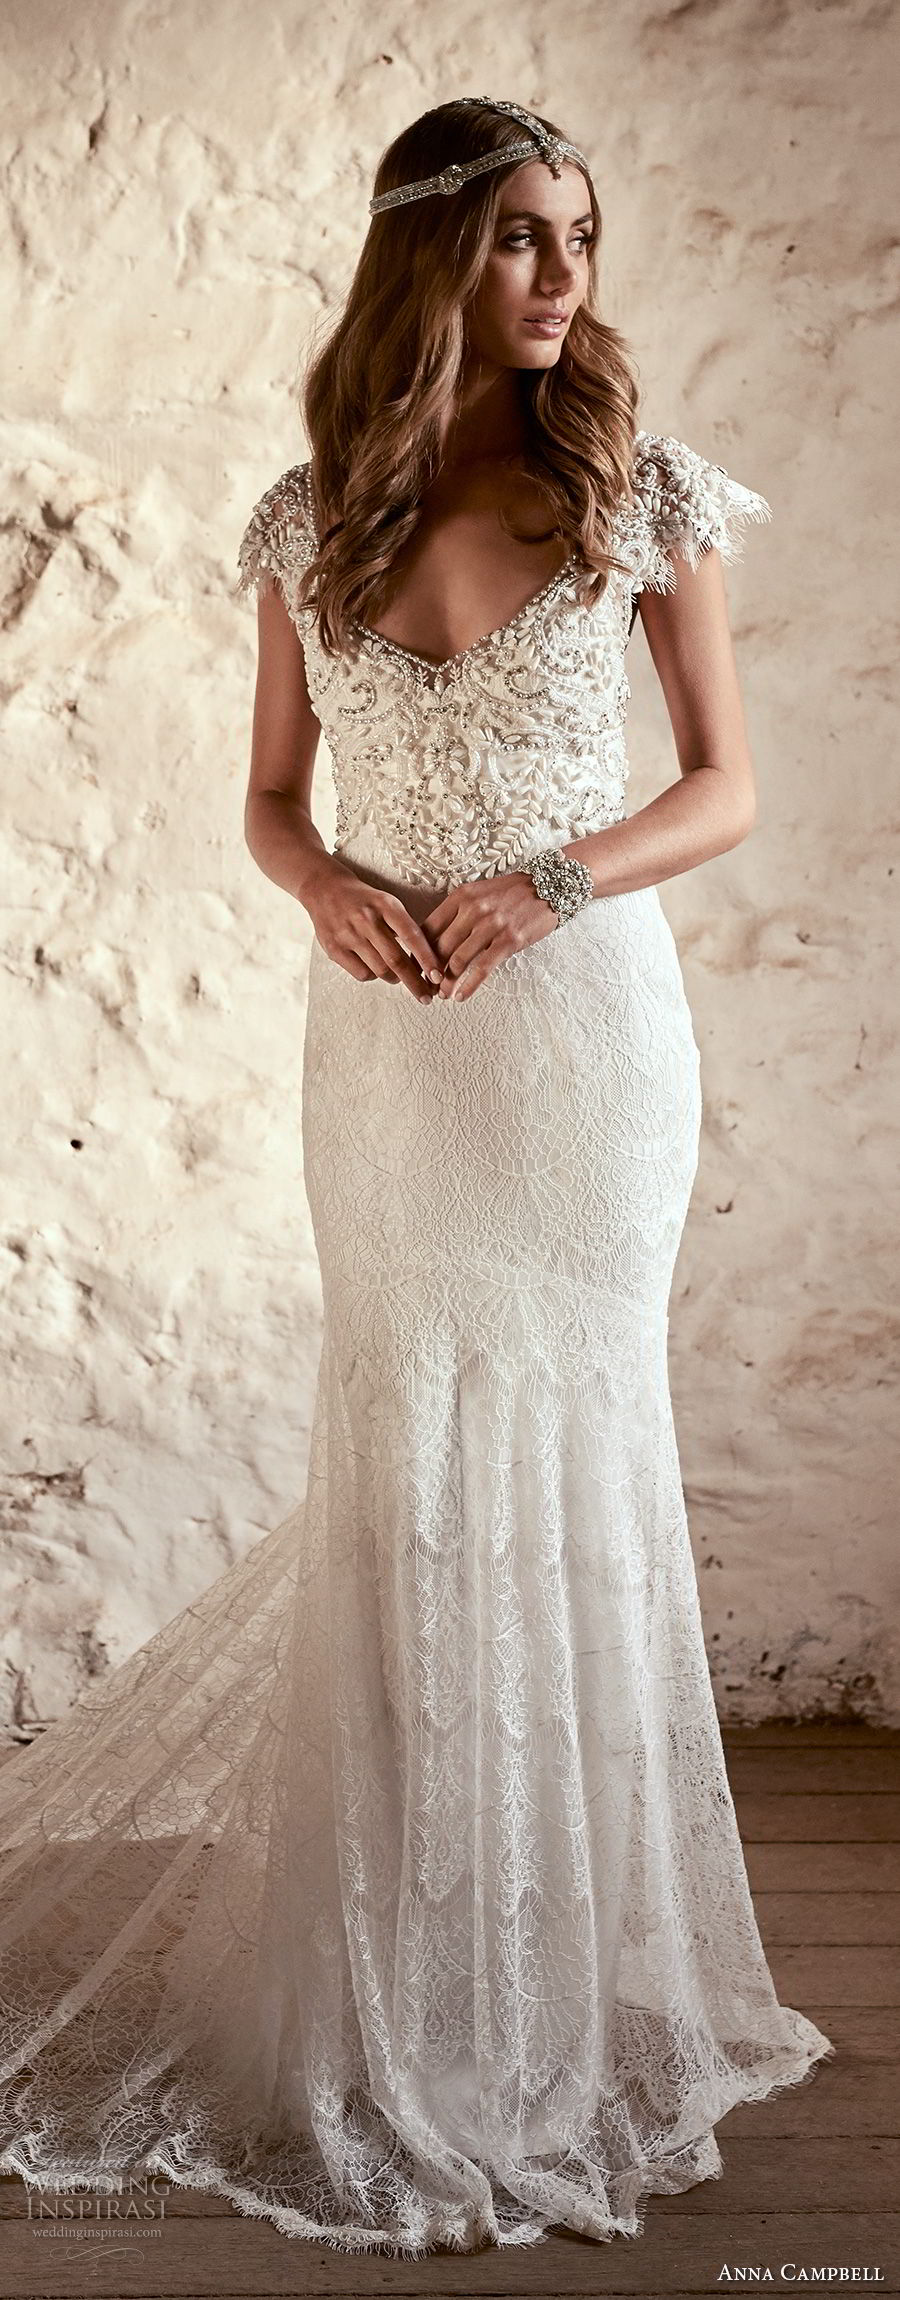 anna campbell 2018 bridal butterfly sleeves scoop neckline heavily beaded embellished bodice romantic elegant fit and flare wedding dress open v back short train (6) lv